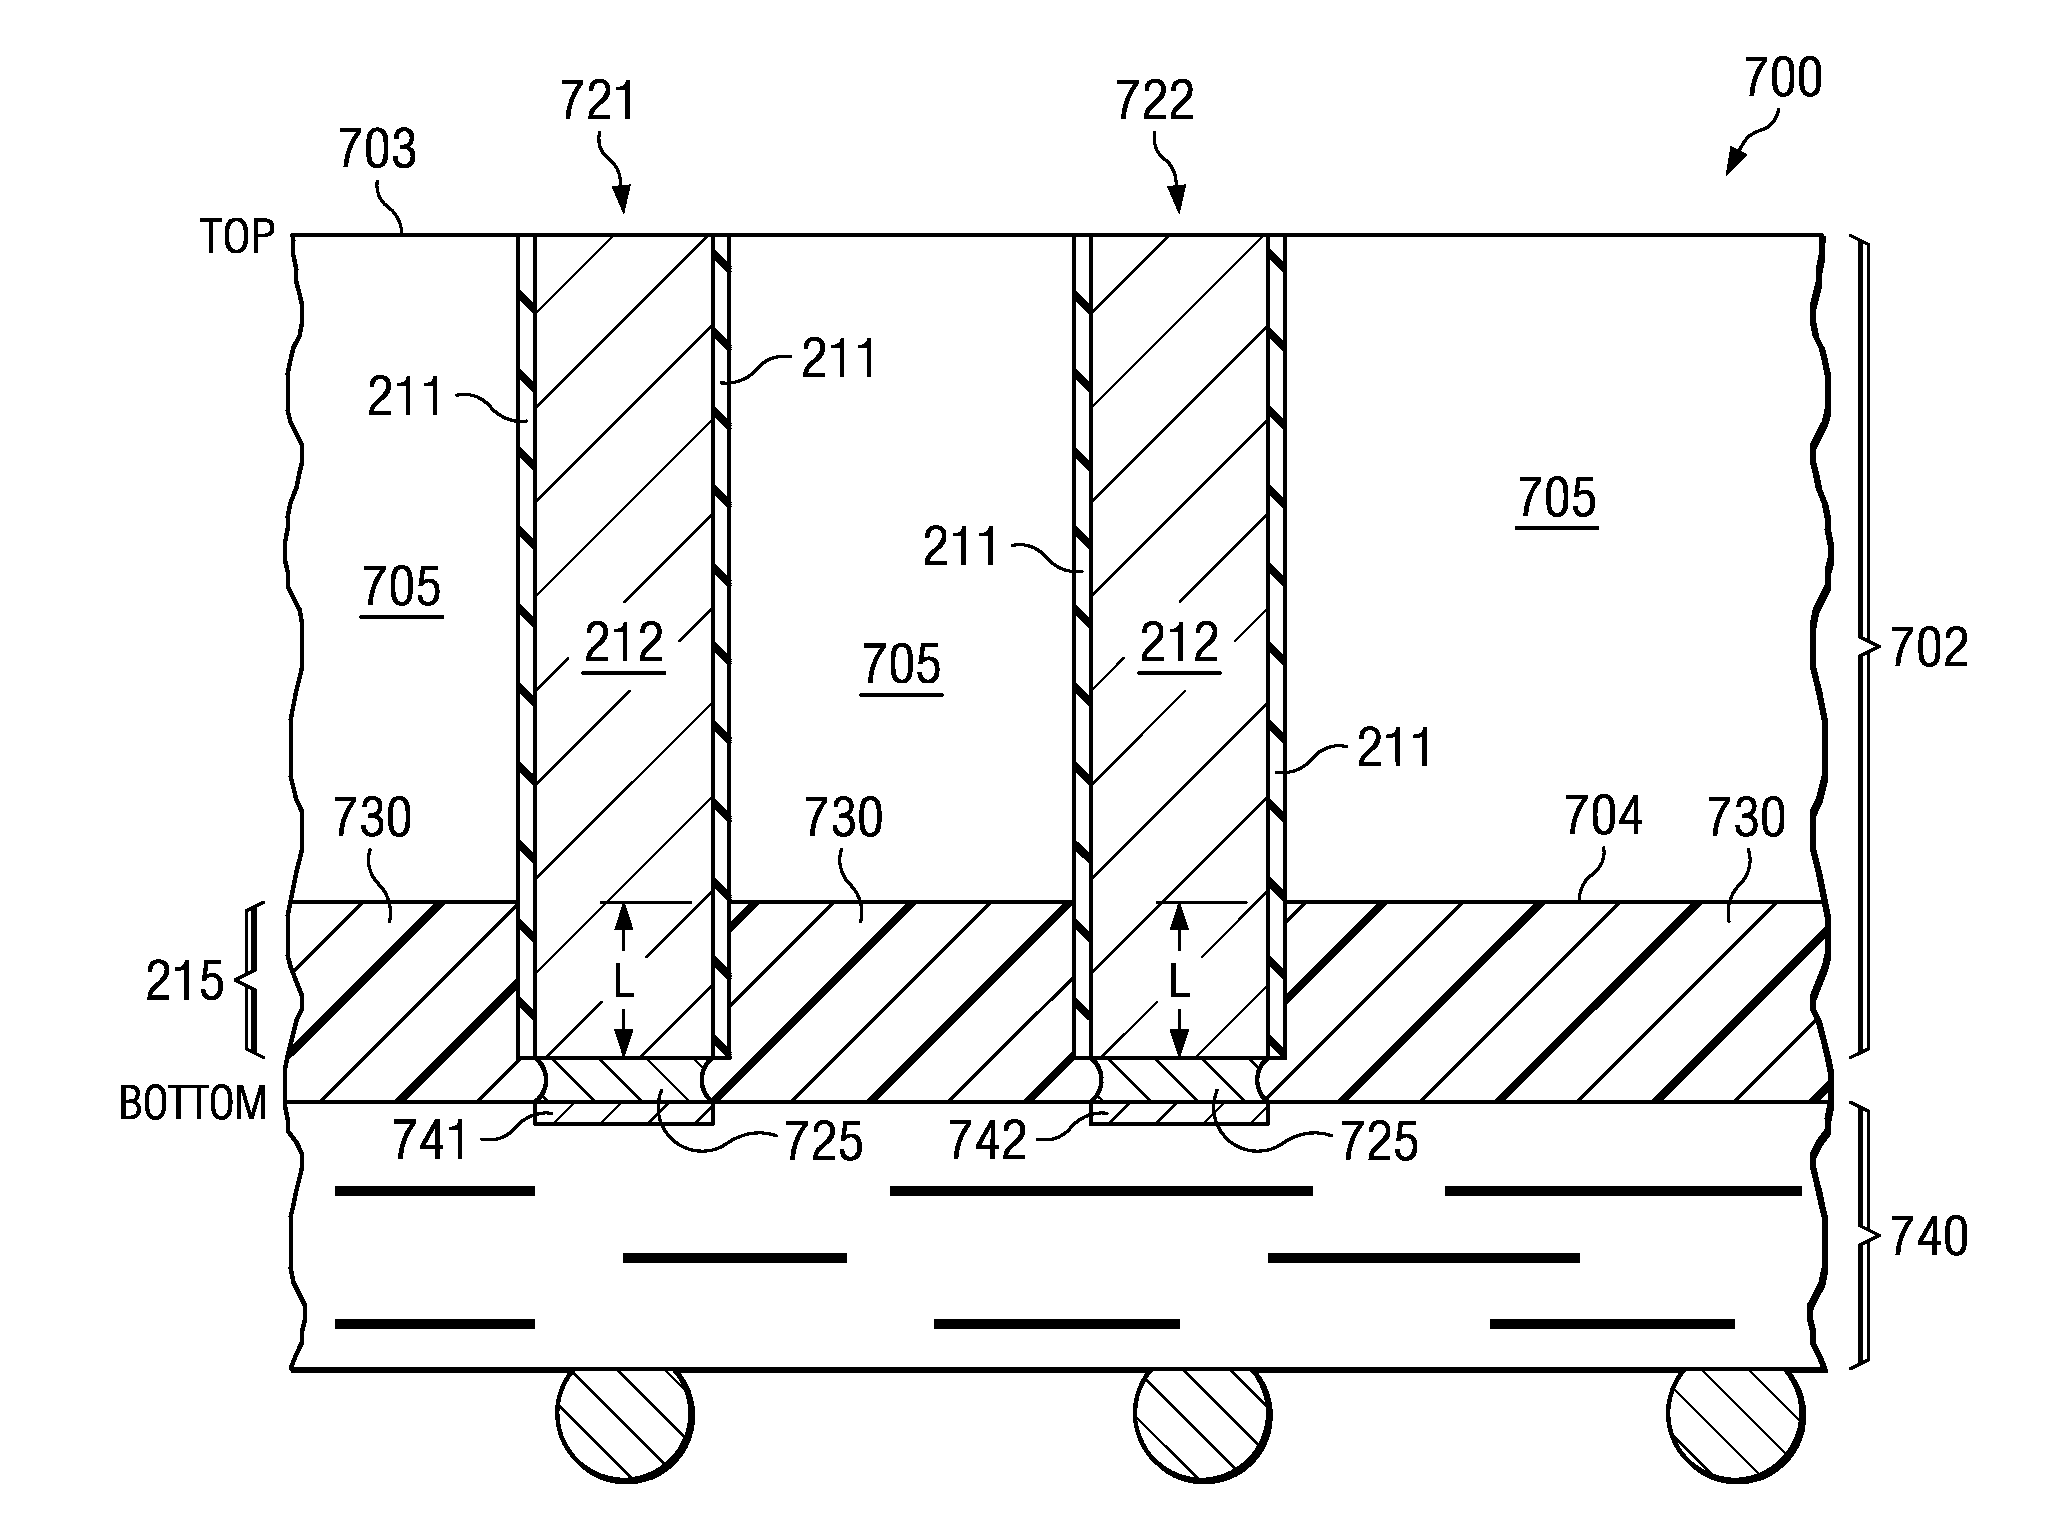 IC die having TSV and wafer level underfill and stacked IC devices comprising a workpiece solder connected to the TSV